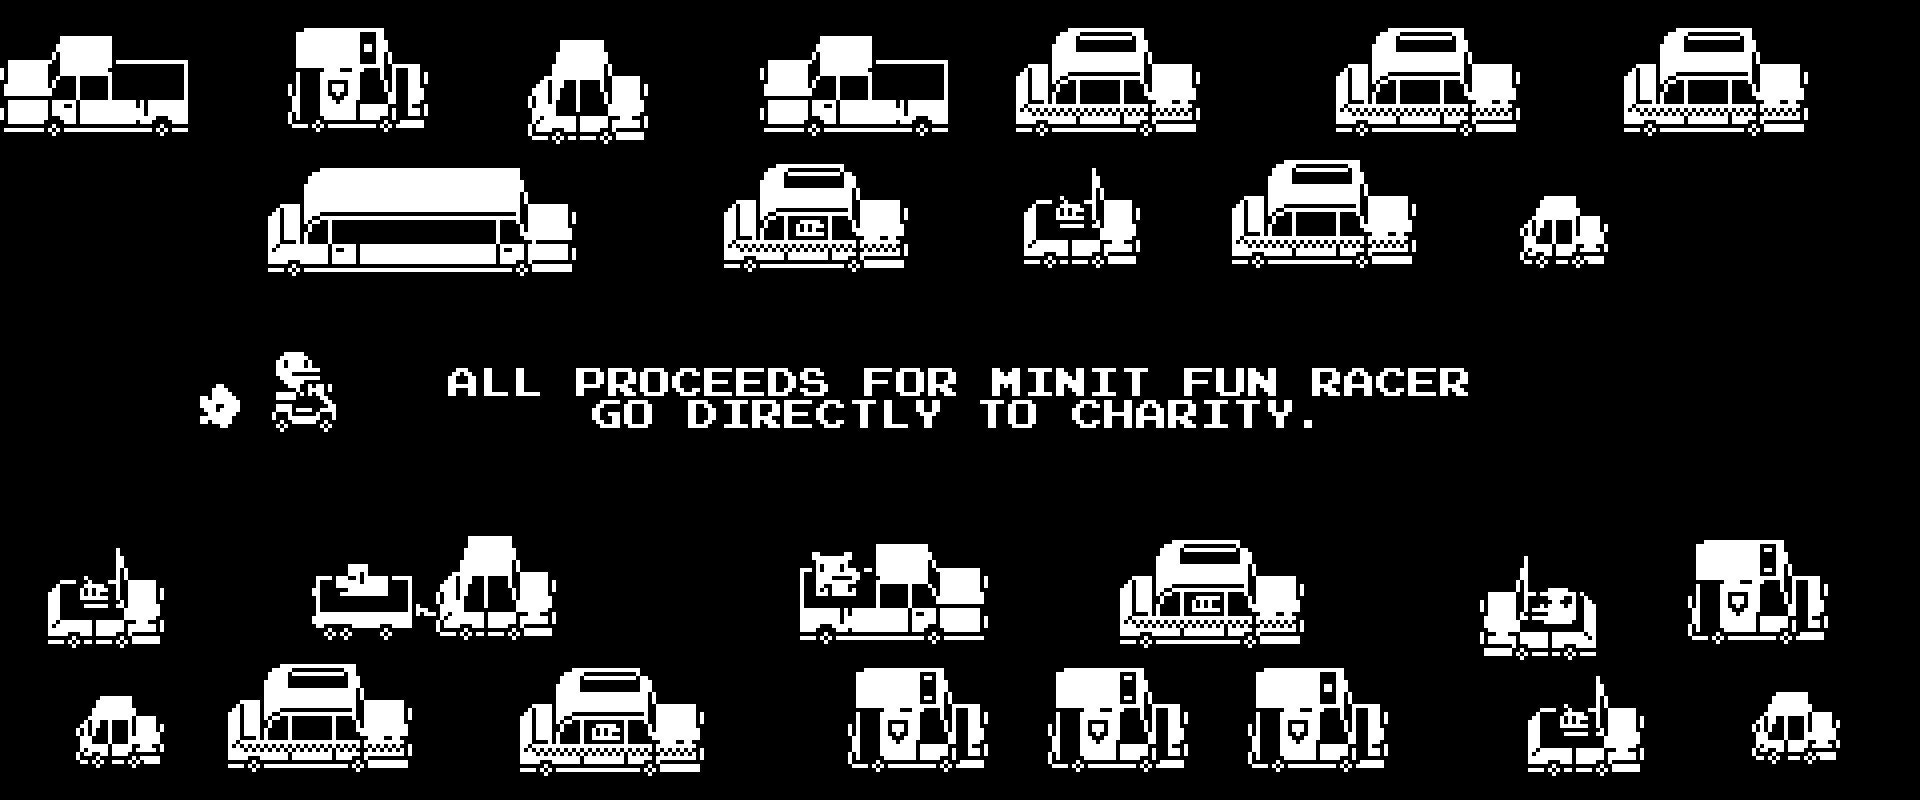 Find the best computers for Minit Fun Racer